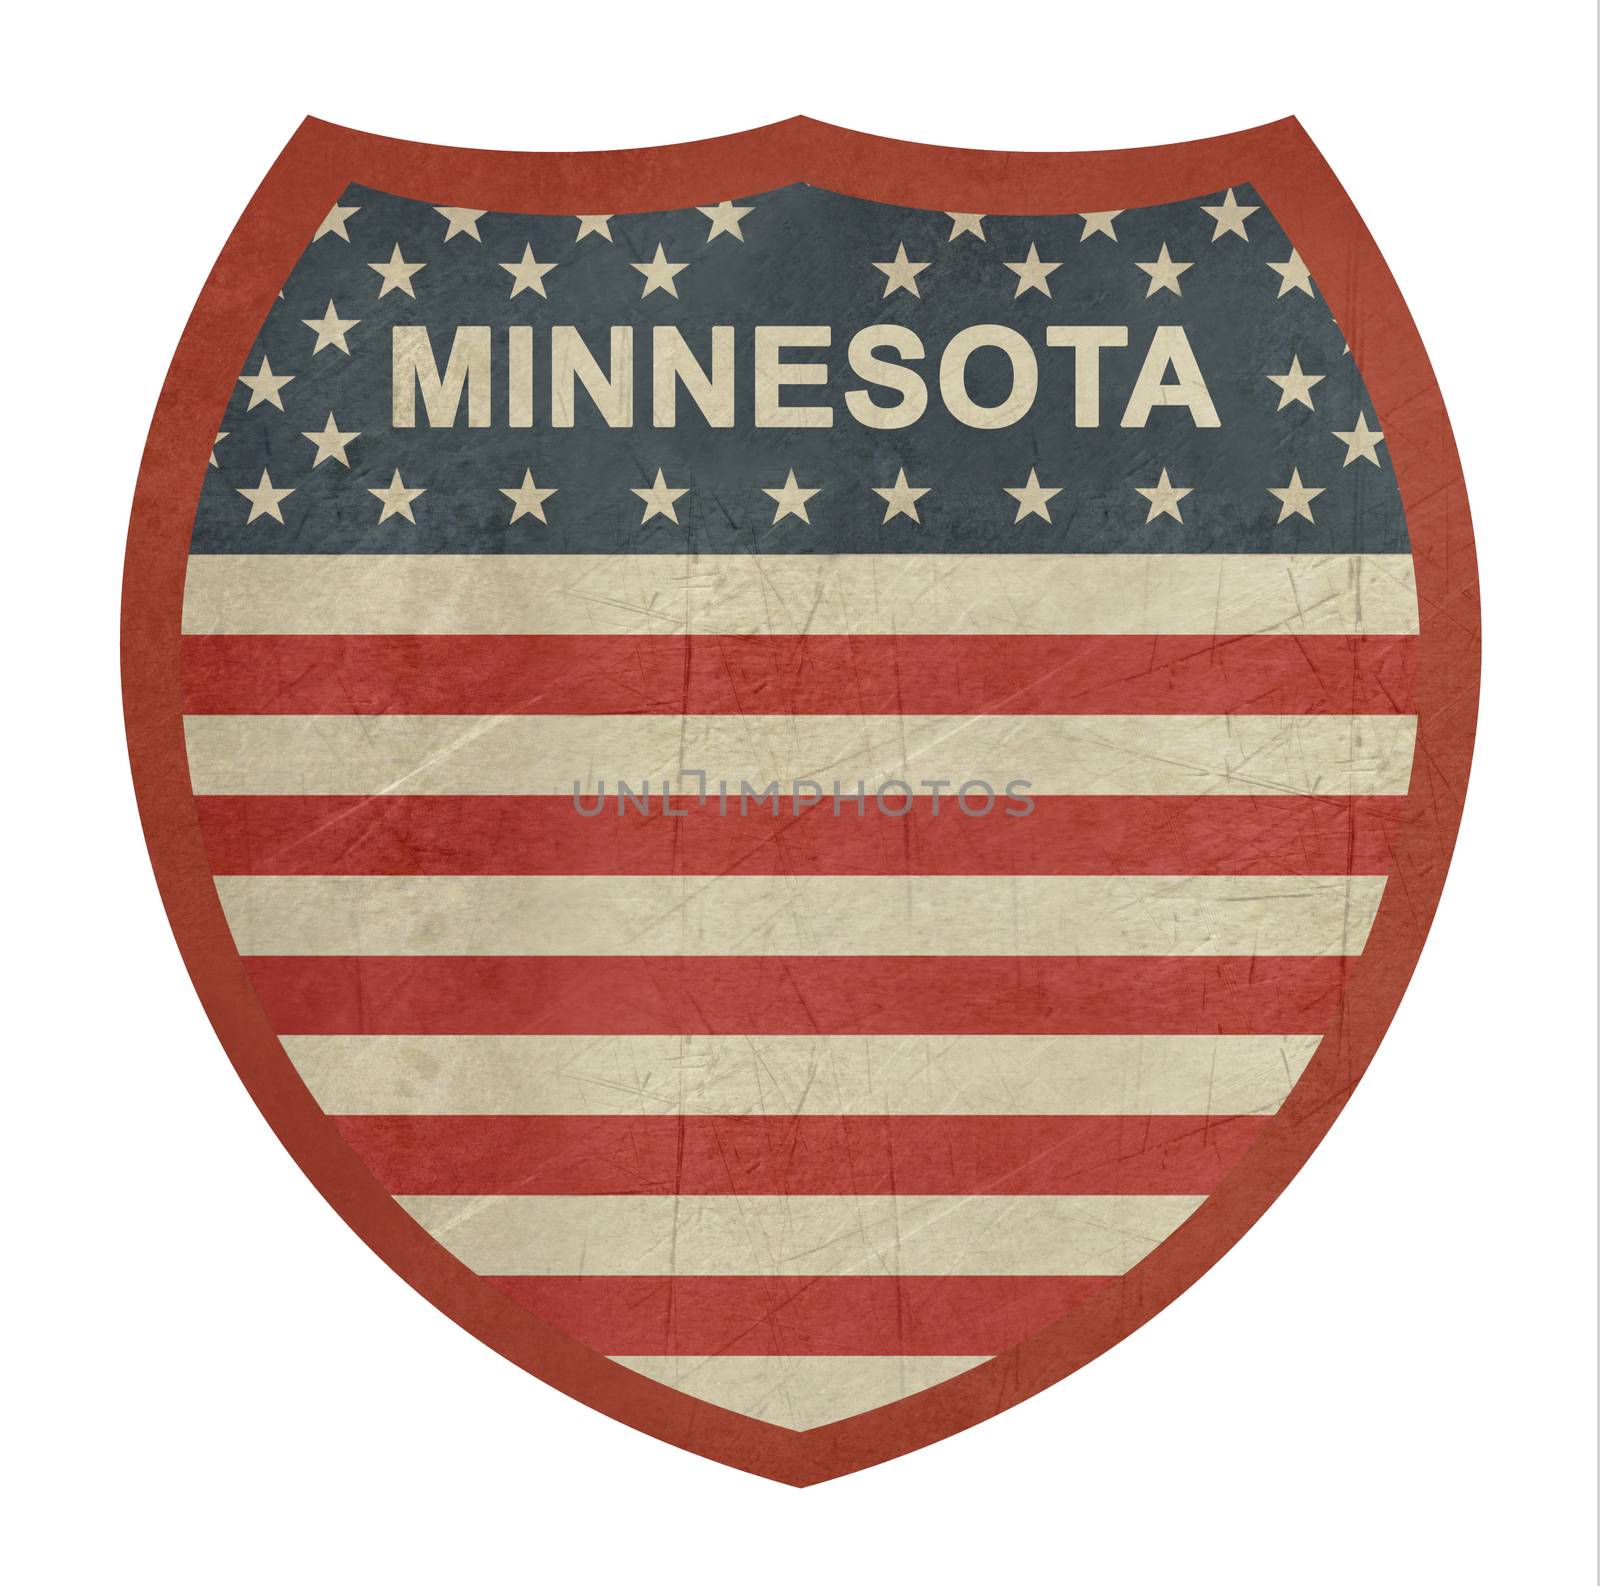 Grunge Minnesota American interstate highway sign isolated on a white background.